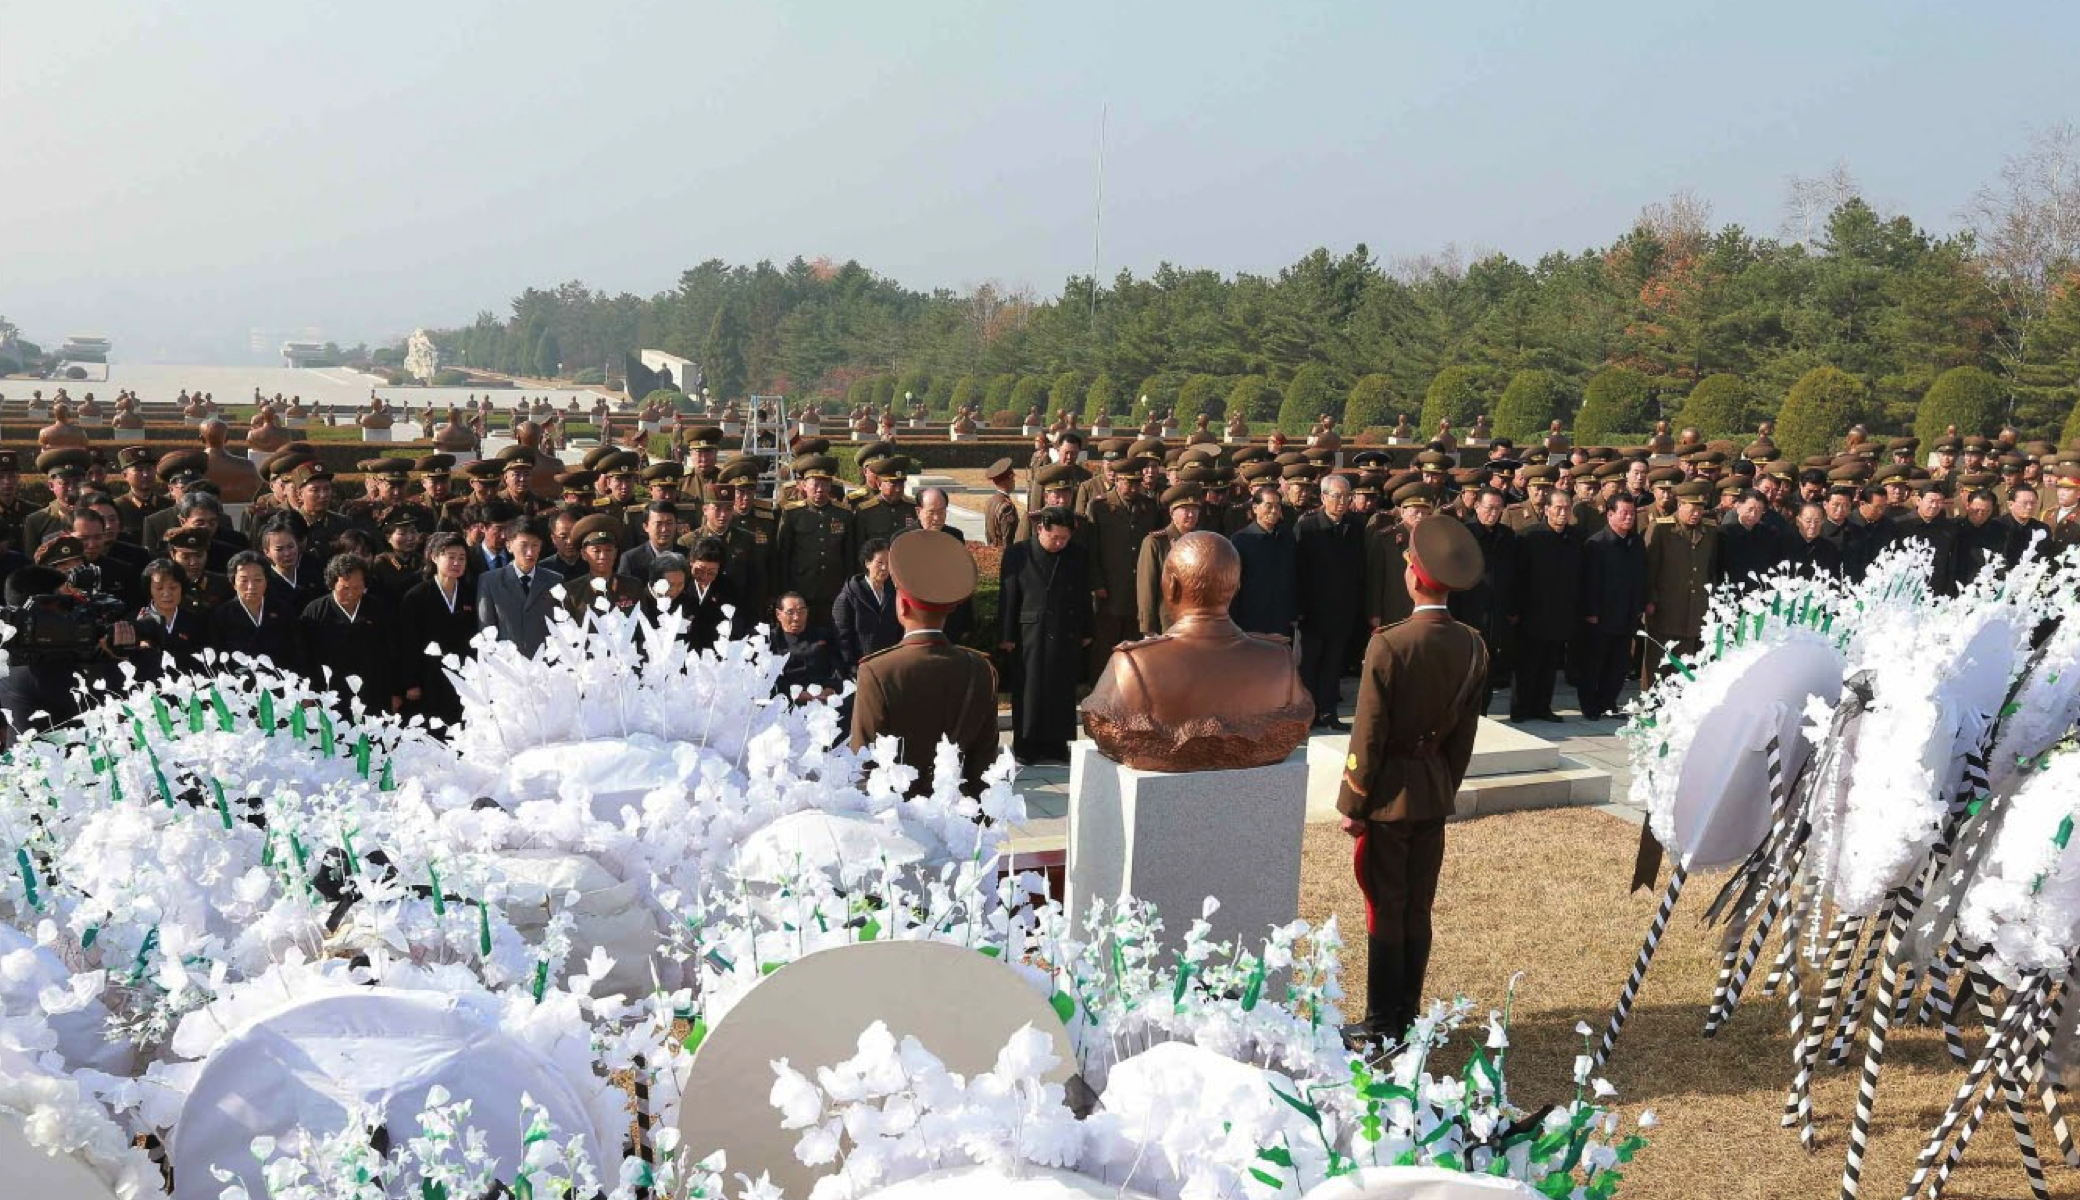 A graveside service to inter MAR Ri Ul Sol at the Revolutionary Martyrs' Cemetery in Pyongyang on November 11, 2015 (Photo: Rodong Sinmun).